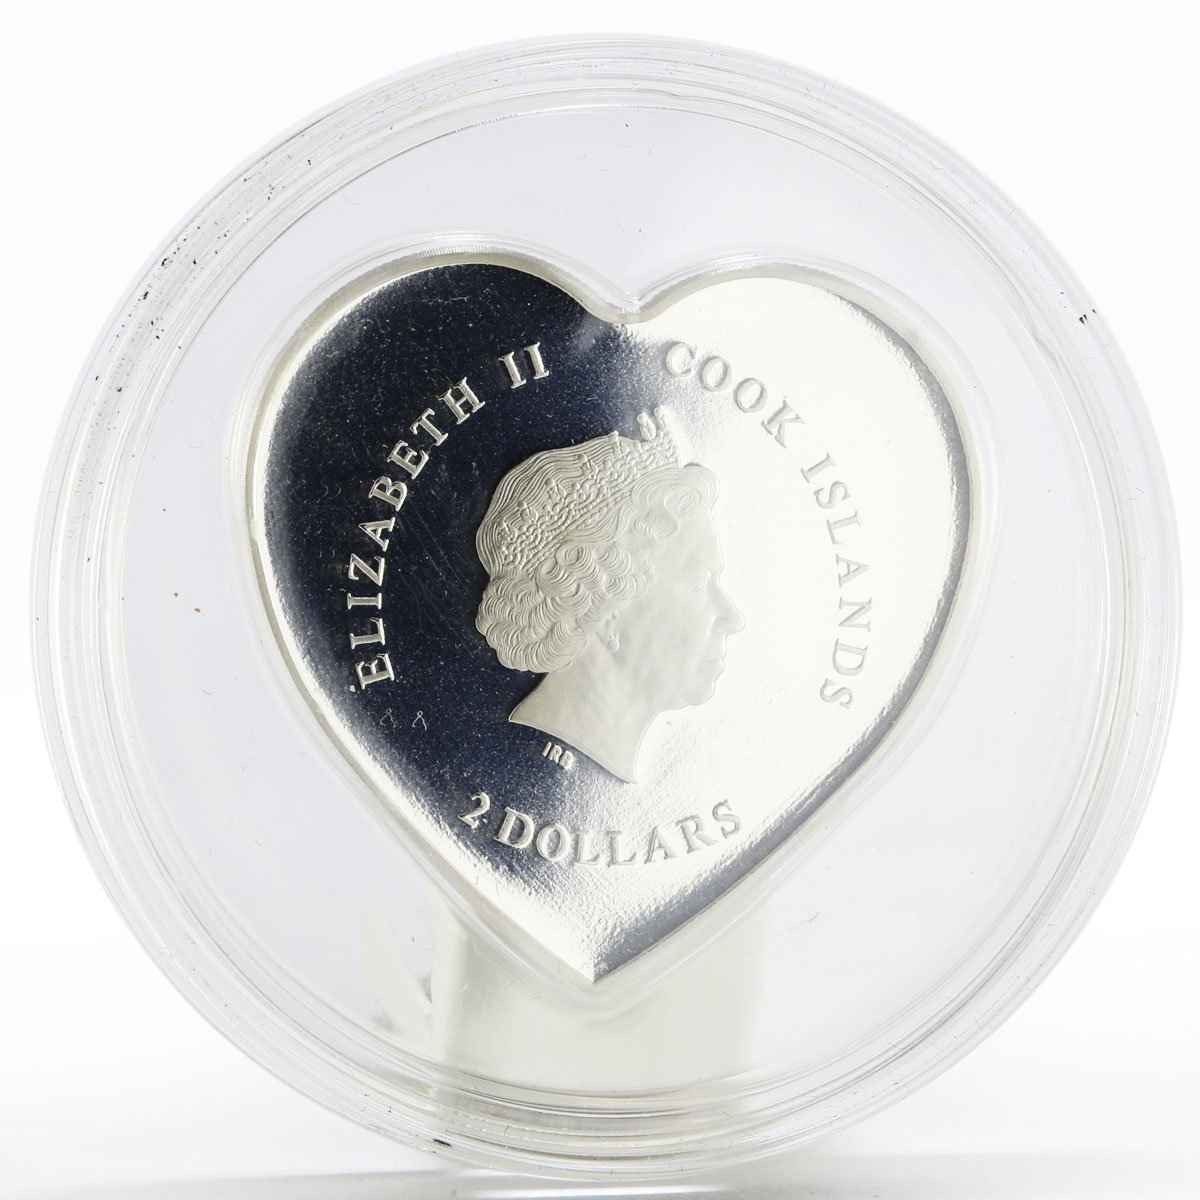 Cook Islands 2 dollars Happy Birthday series Boy and Heart silver coin 2013